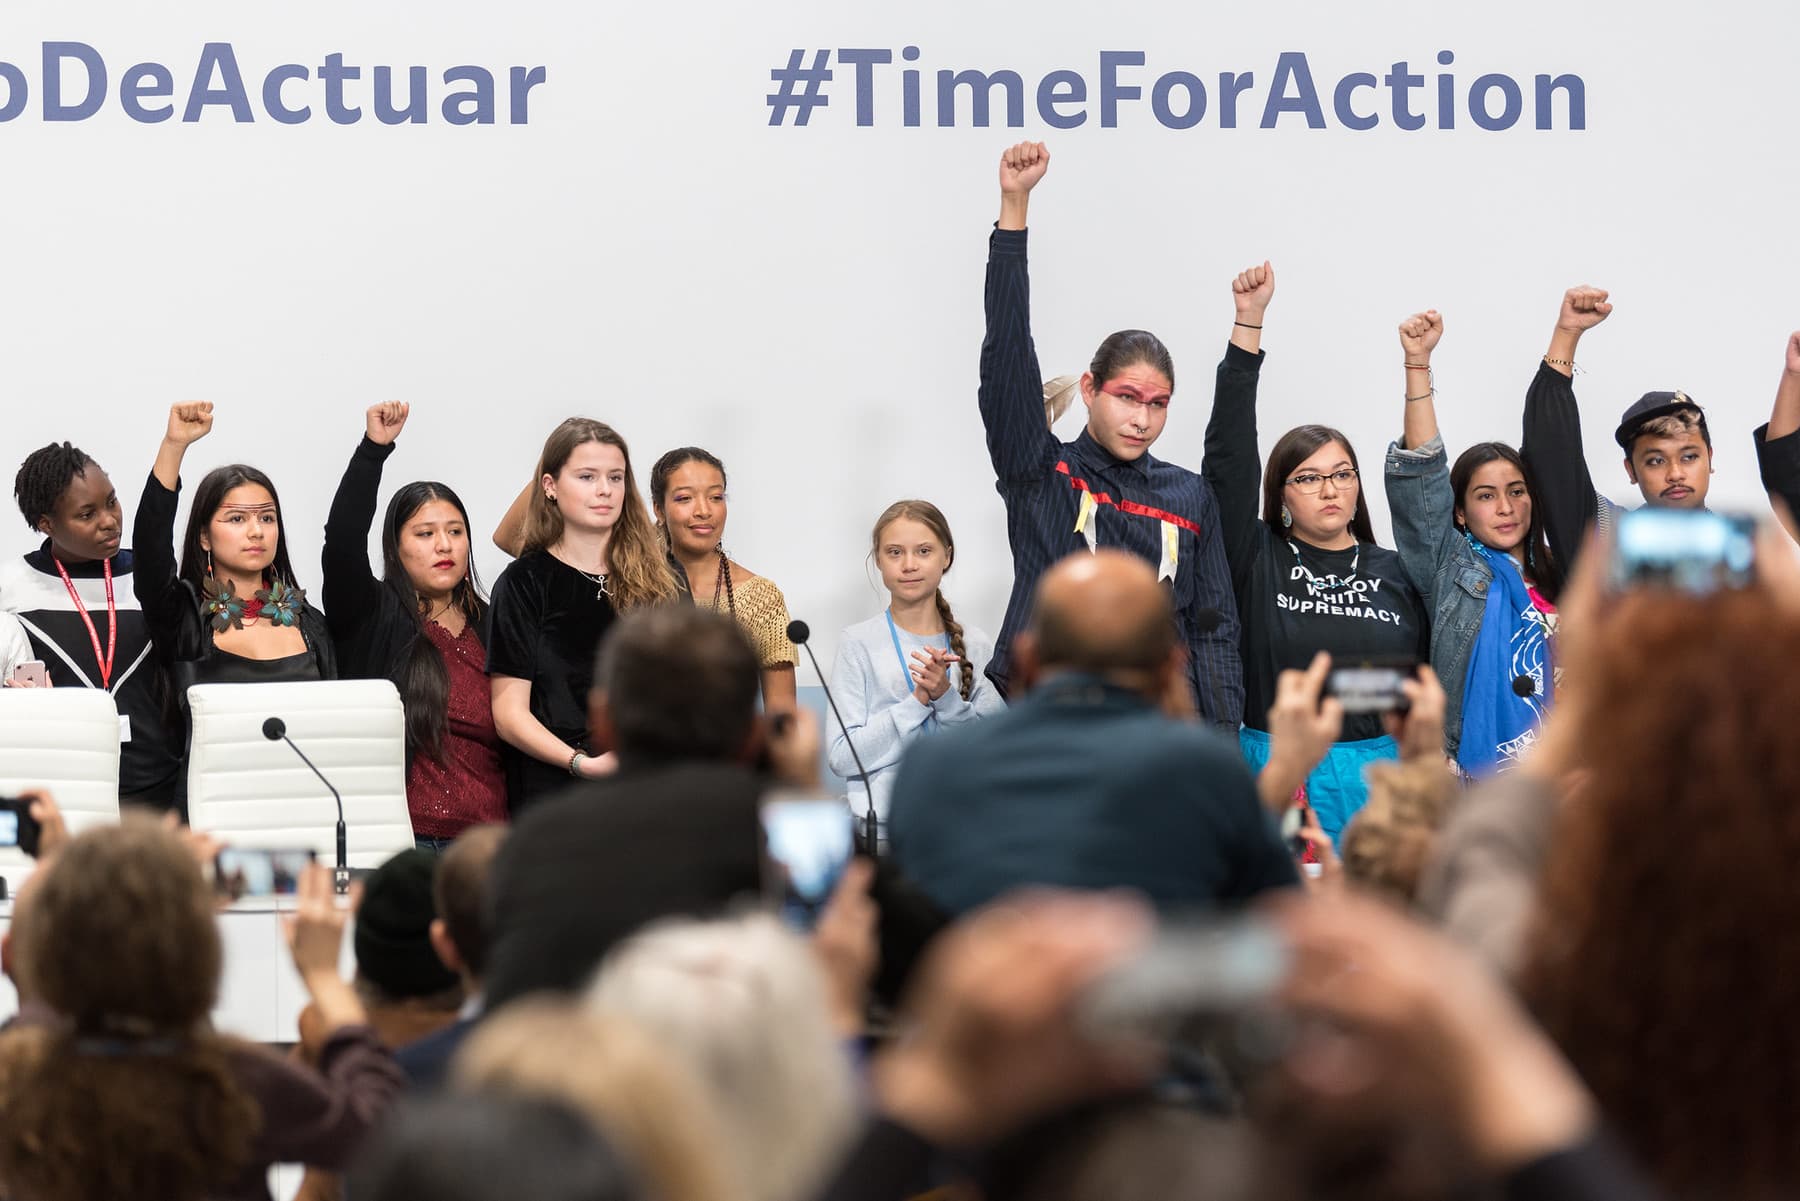 9 December 2019, Madrid, Spain: Press conference with Greta Thunberg and Fridays for Future, at COP25 in Madrid.